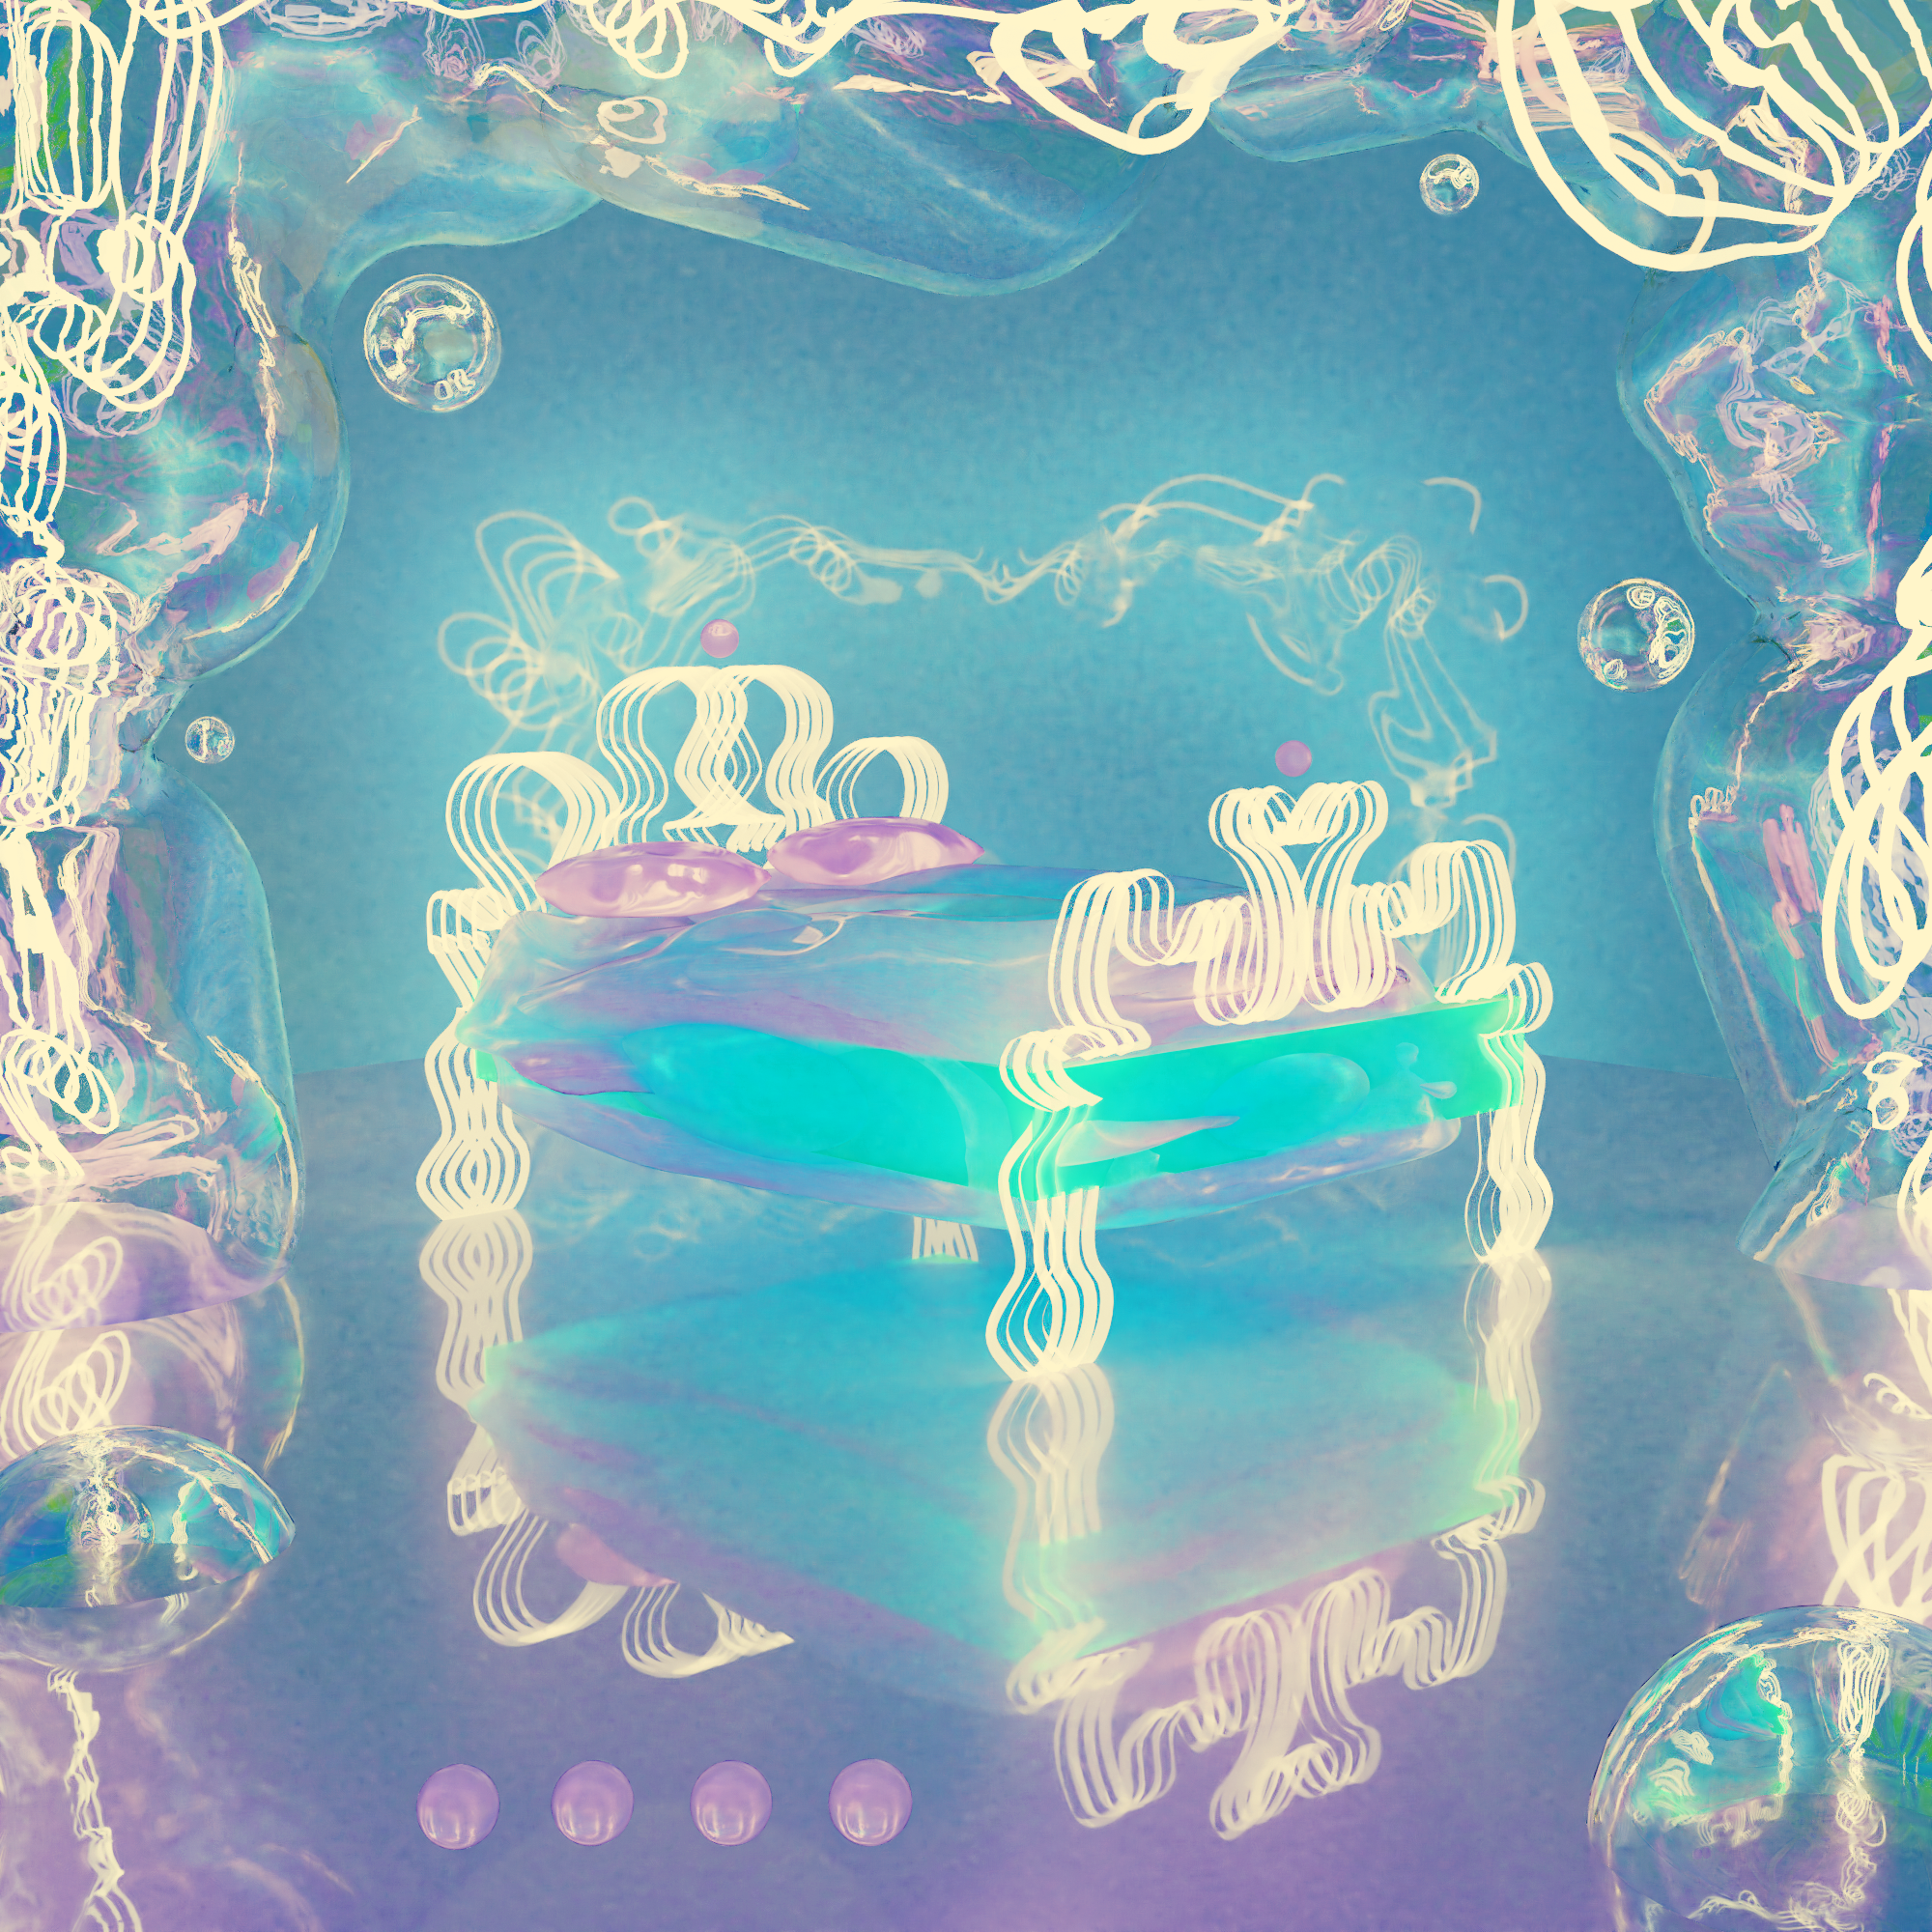 a dreamy CG illustration of a transparent bed with twishing white
      headboard. The bed rests at an angle on a reflective floor surrounded by
     reflective bubble shapes and white twisting curls.